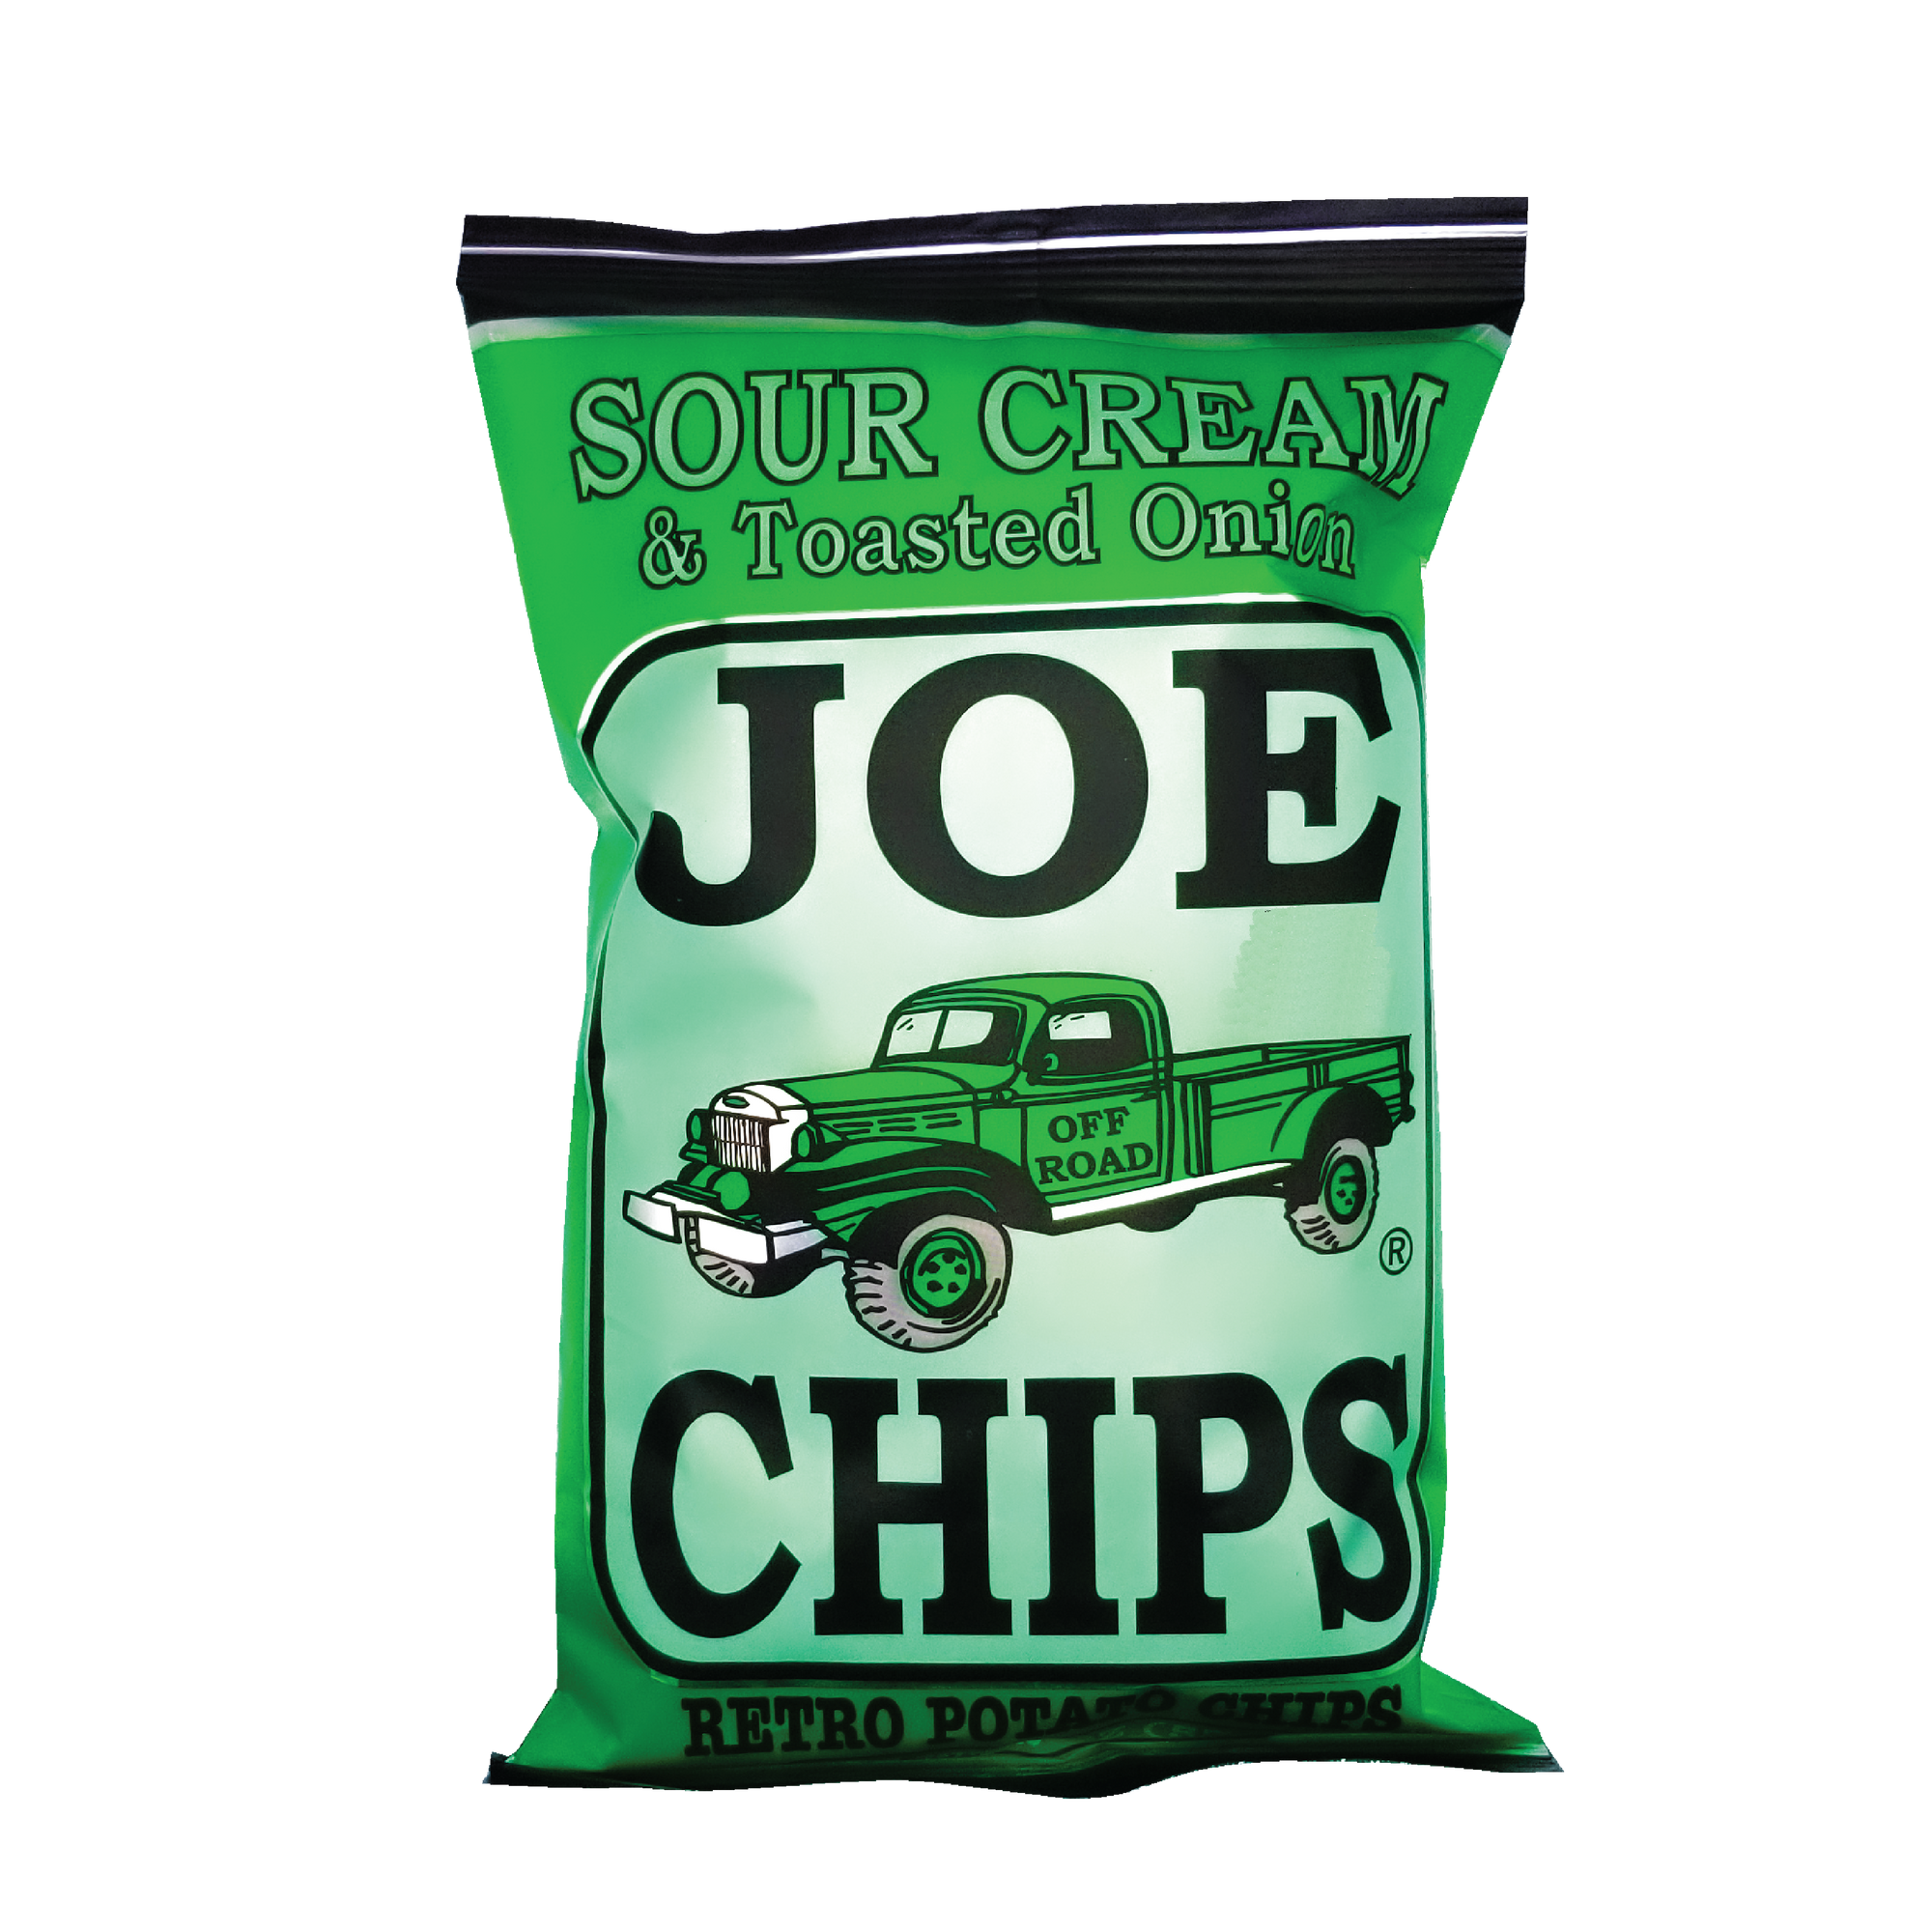 sour cream and toasted onion 2 oz and 5 oz joe chips